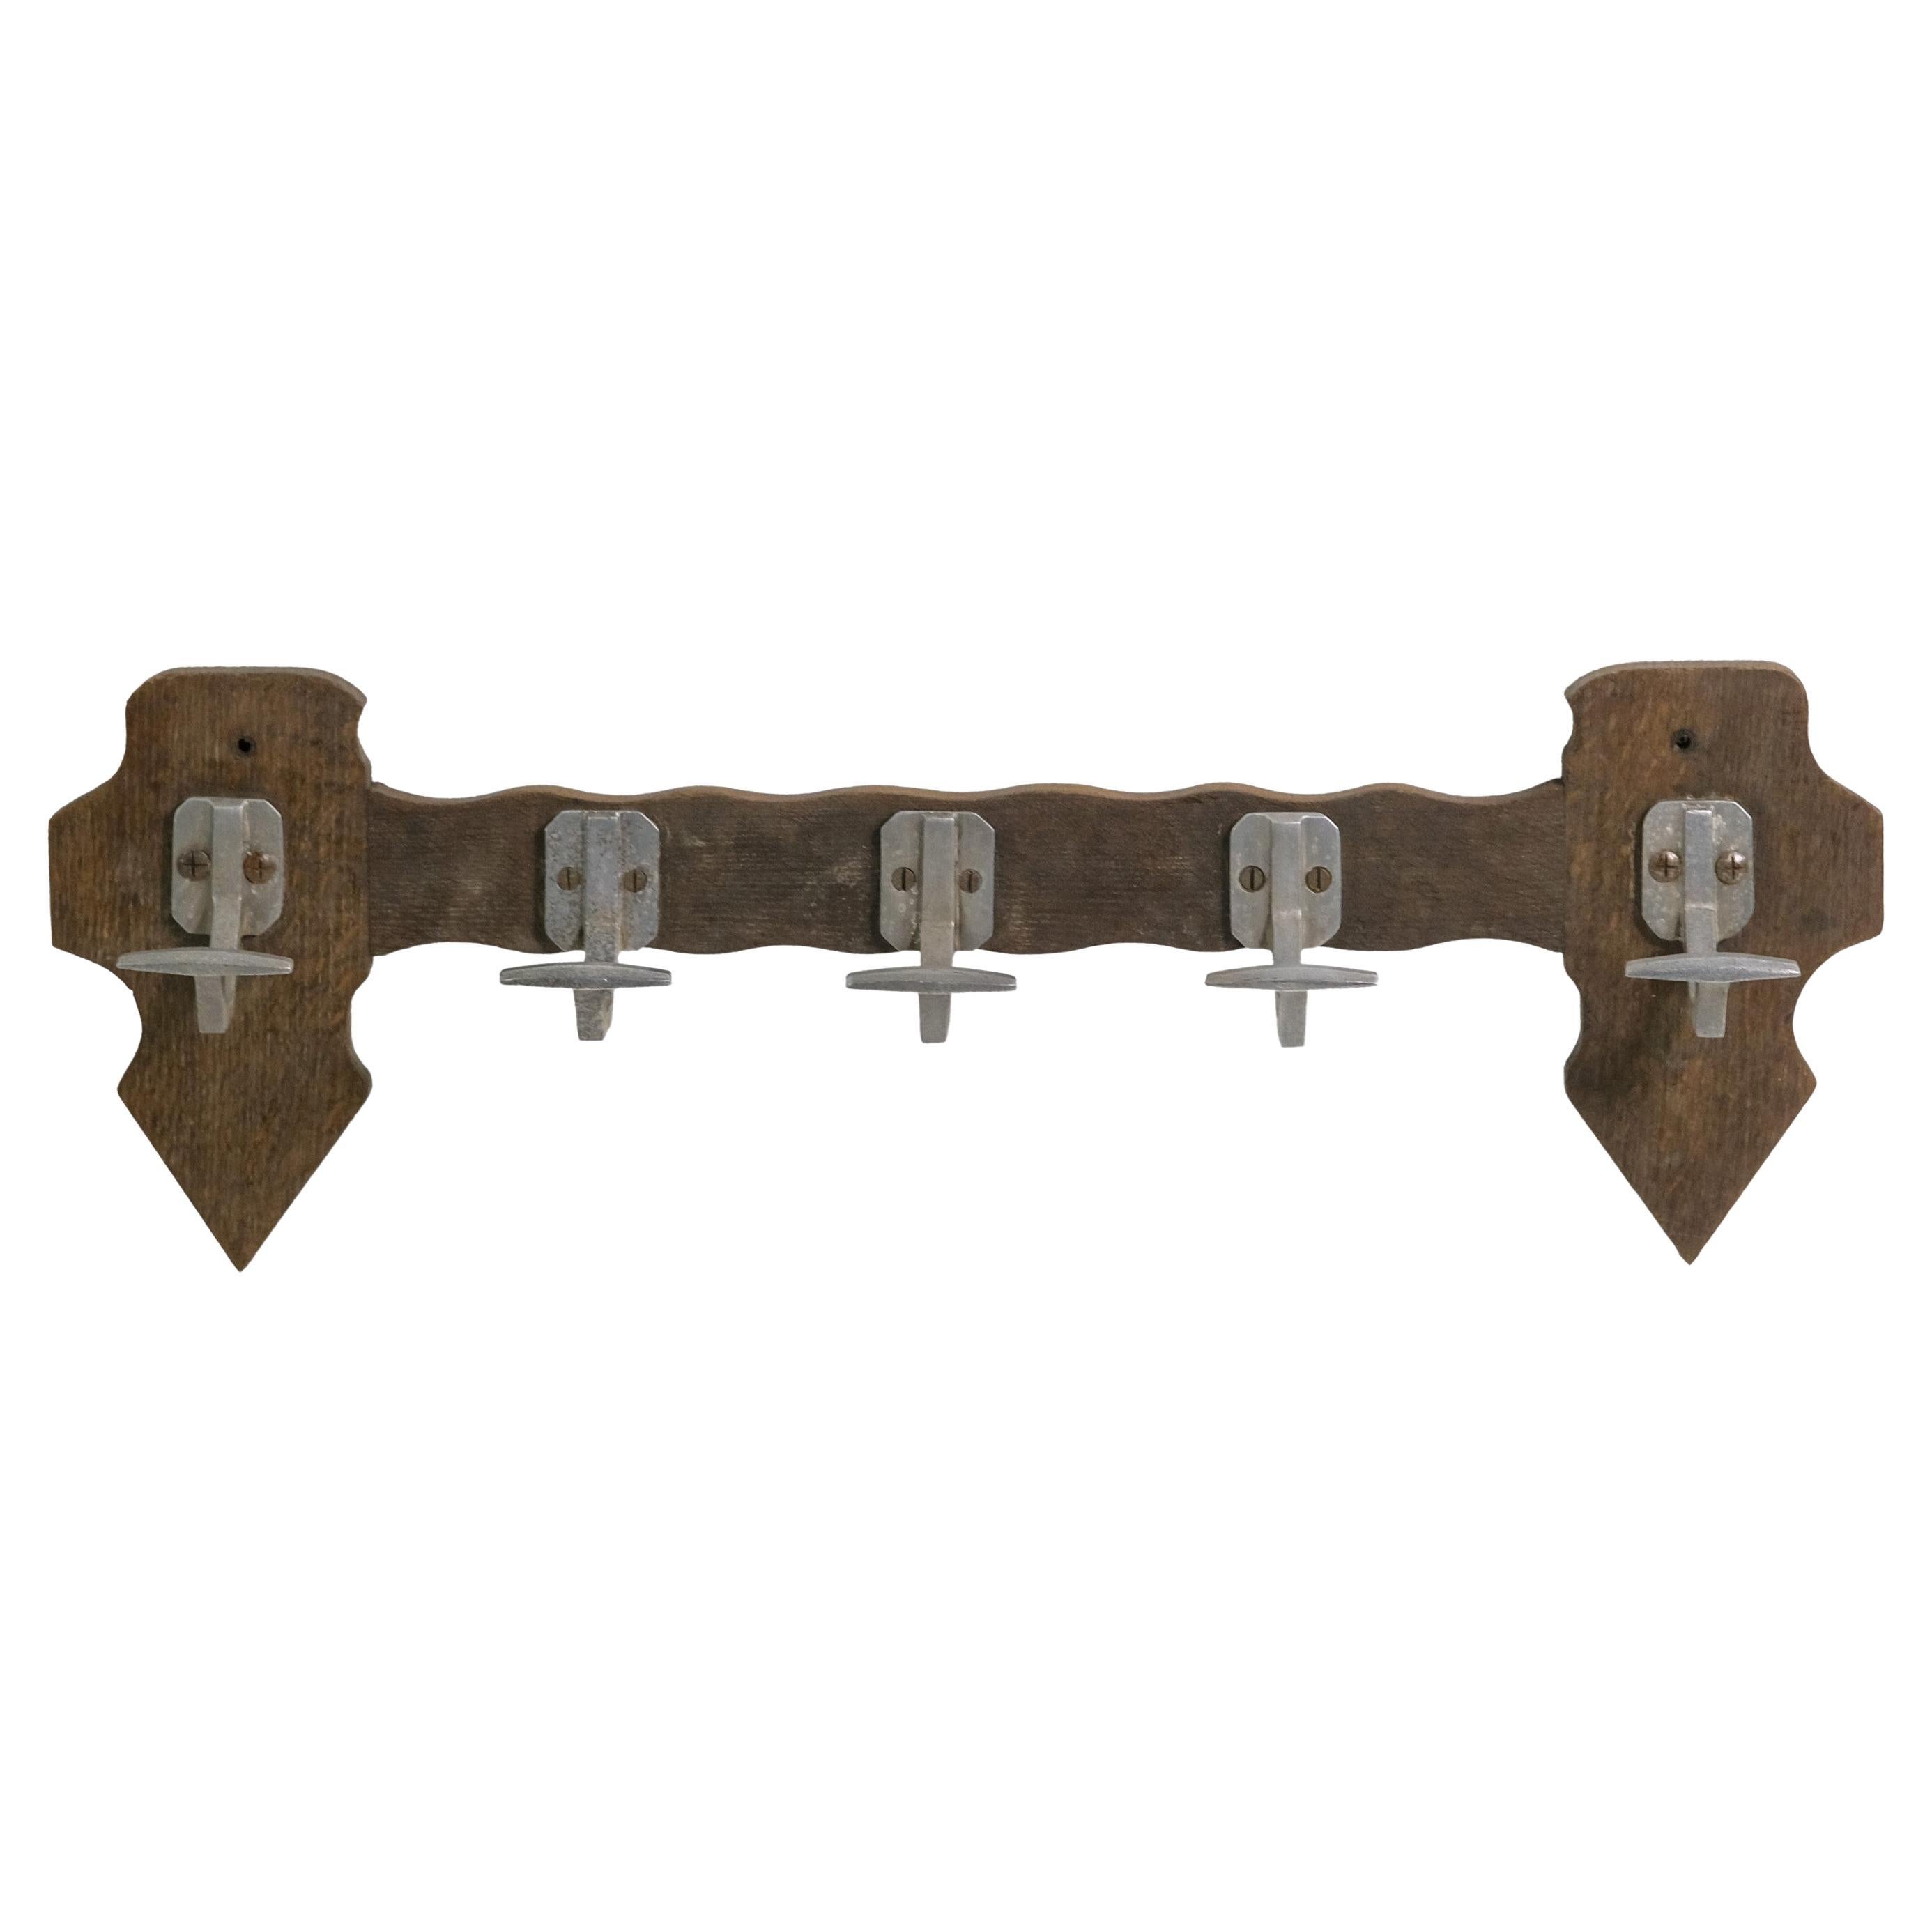 Wall mounted hat and coat rack. Five double hooks mounted on a rustic wood plank. Please note, this item is located in our Scranton, PA location.